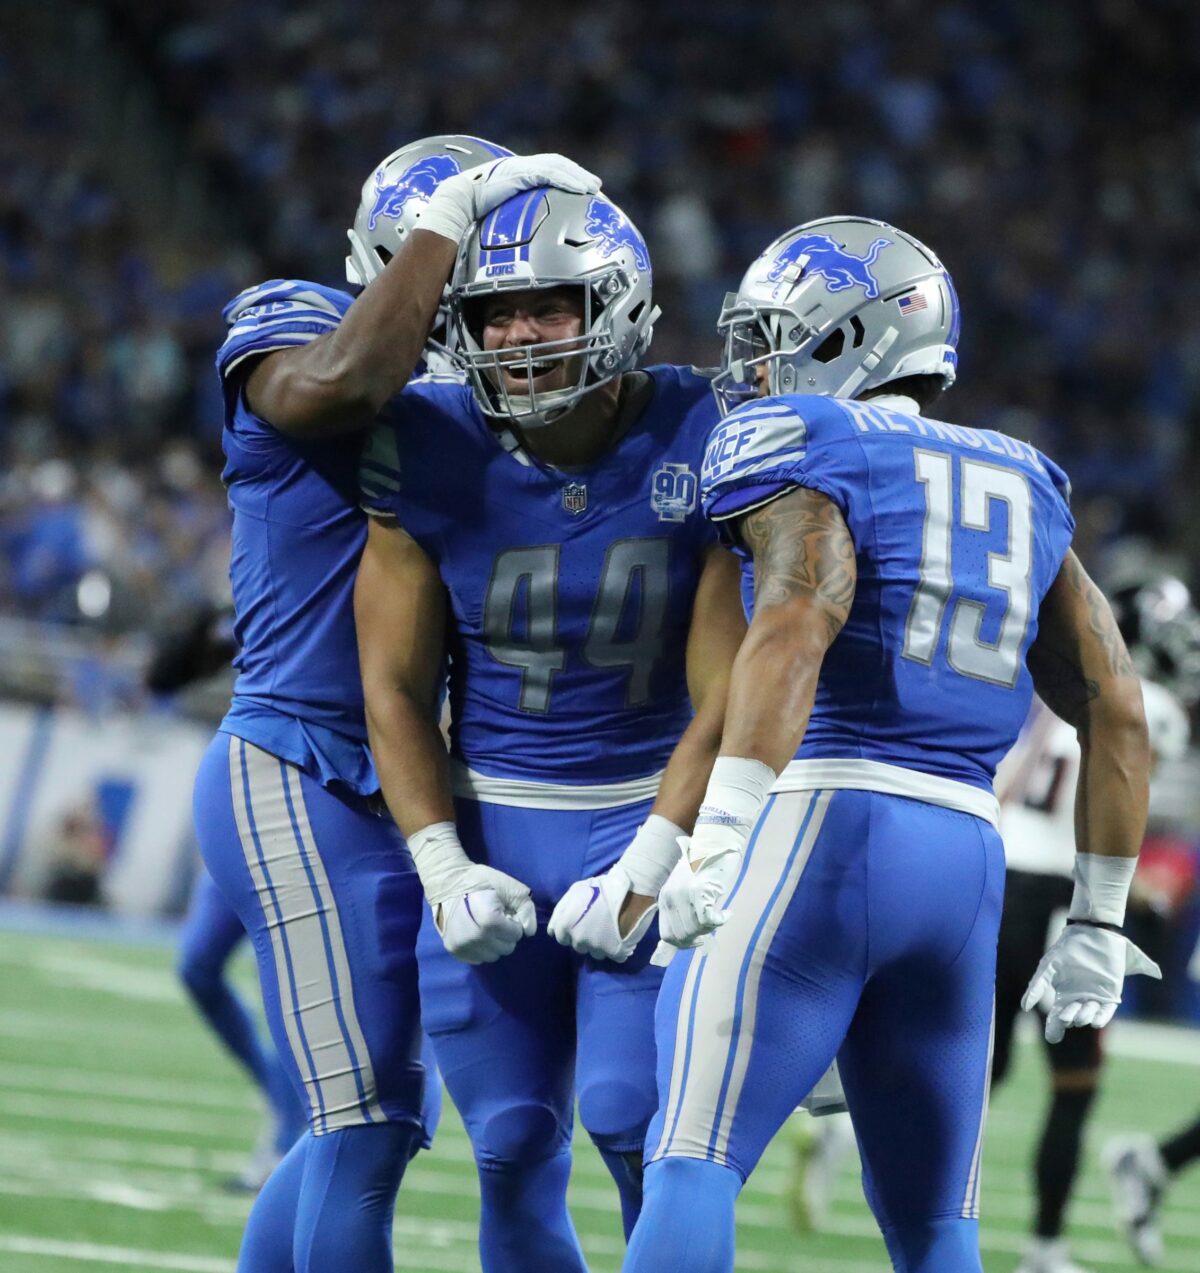 Quick takeaways from the Lions win over the Falcons